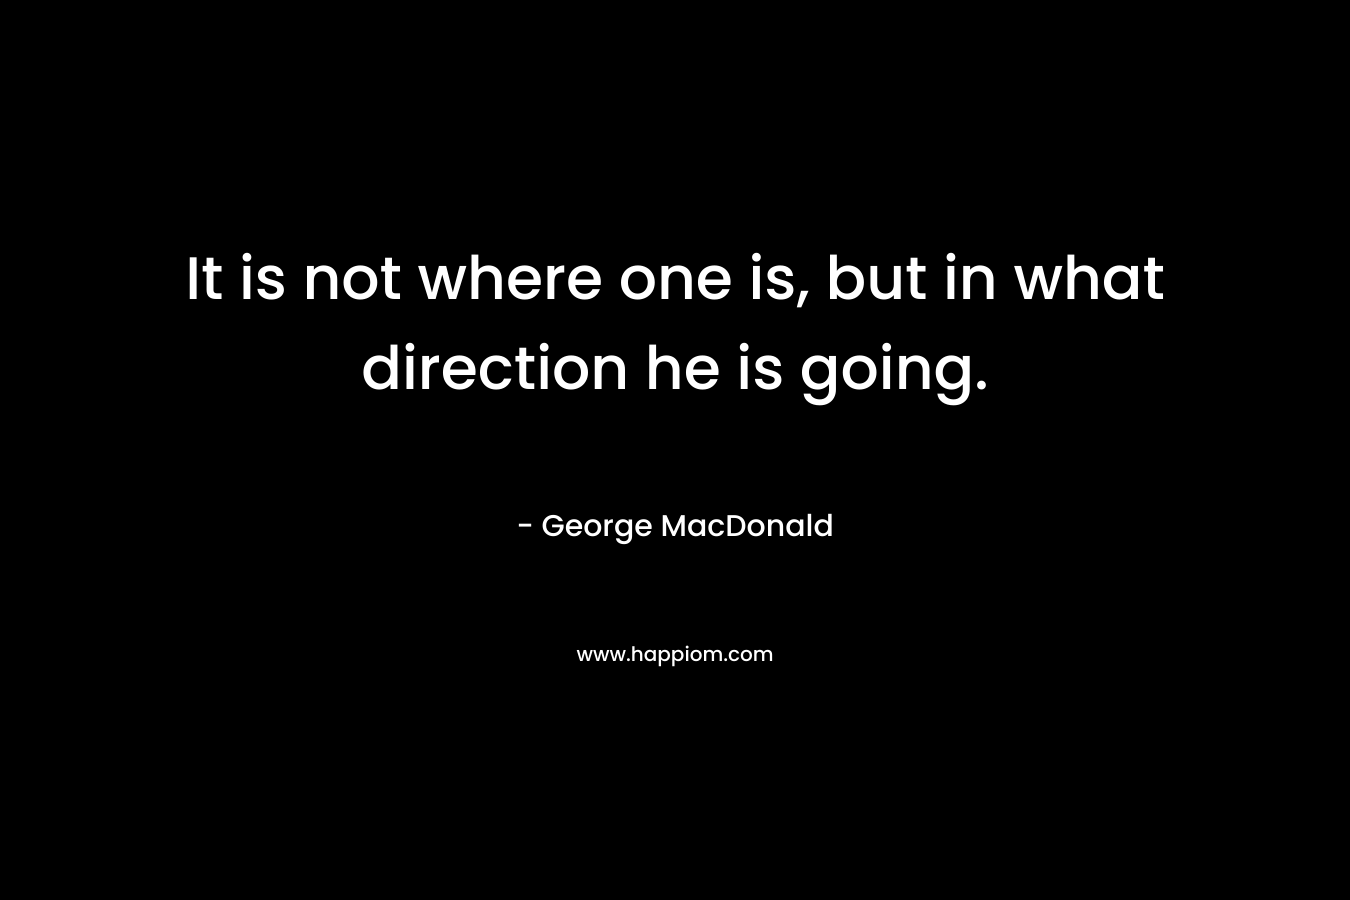 It is not where one is, but in what direction he is going. – George MacDonald